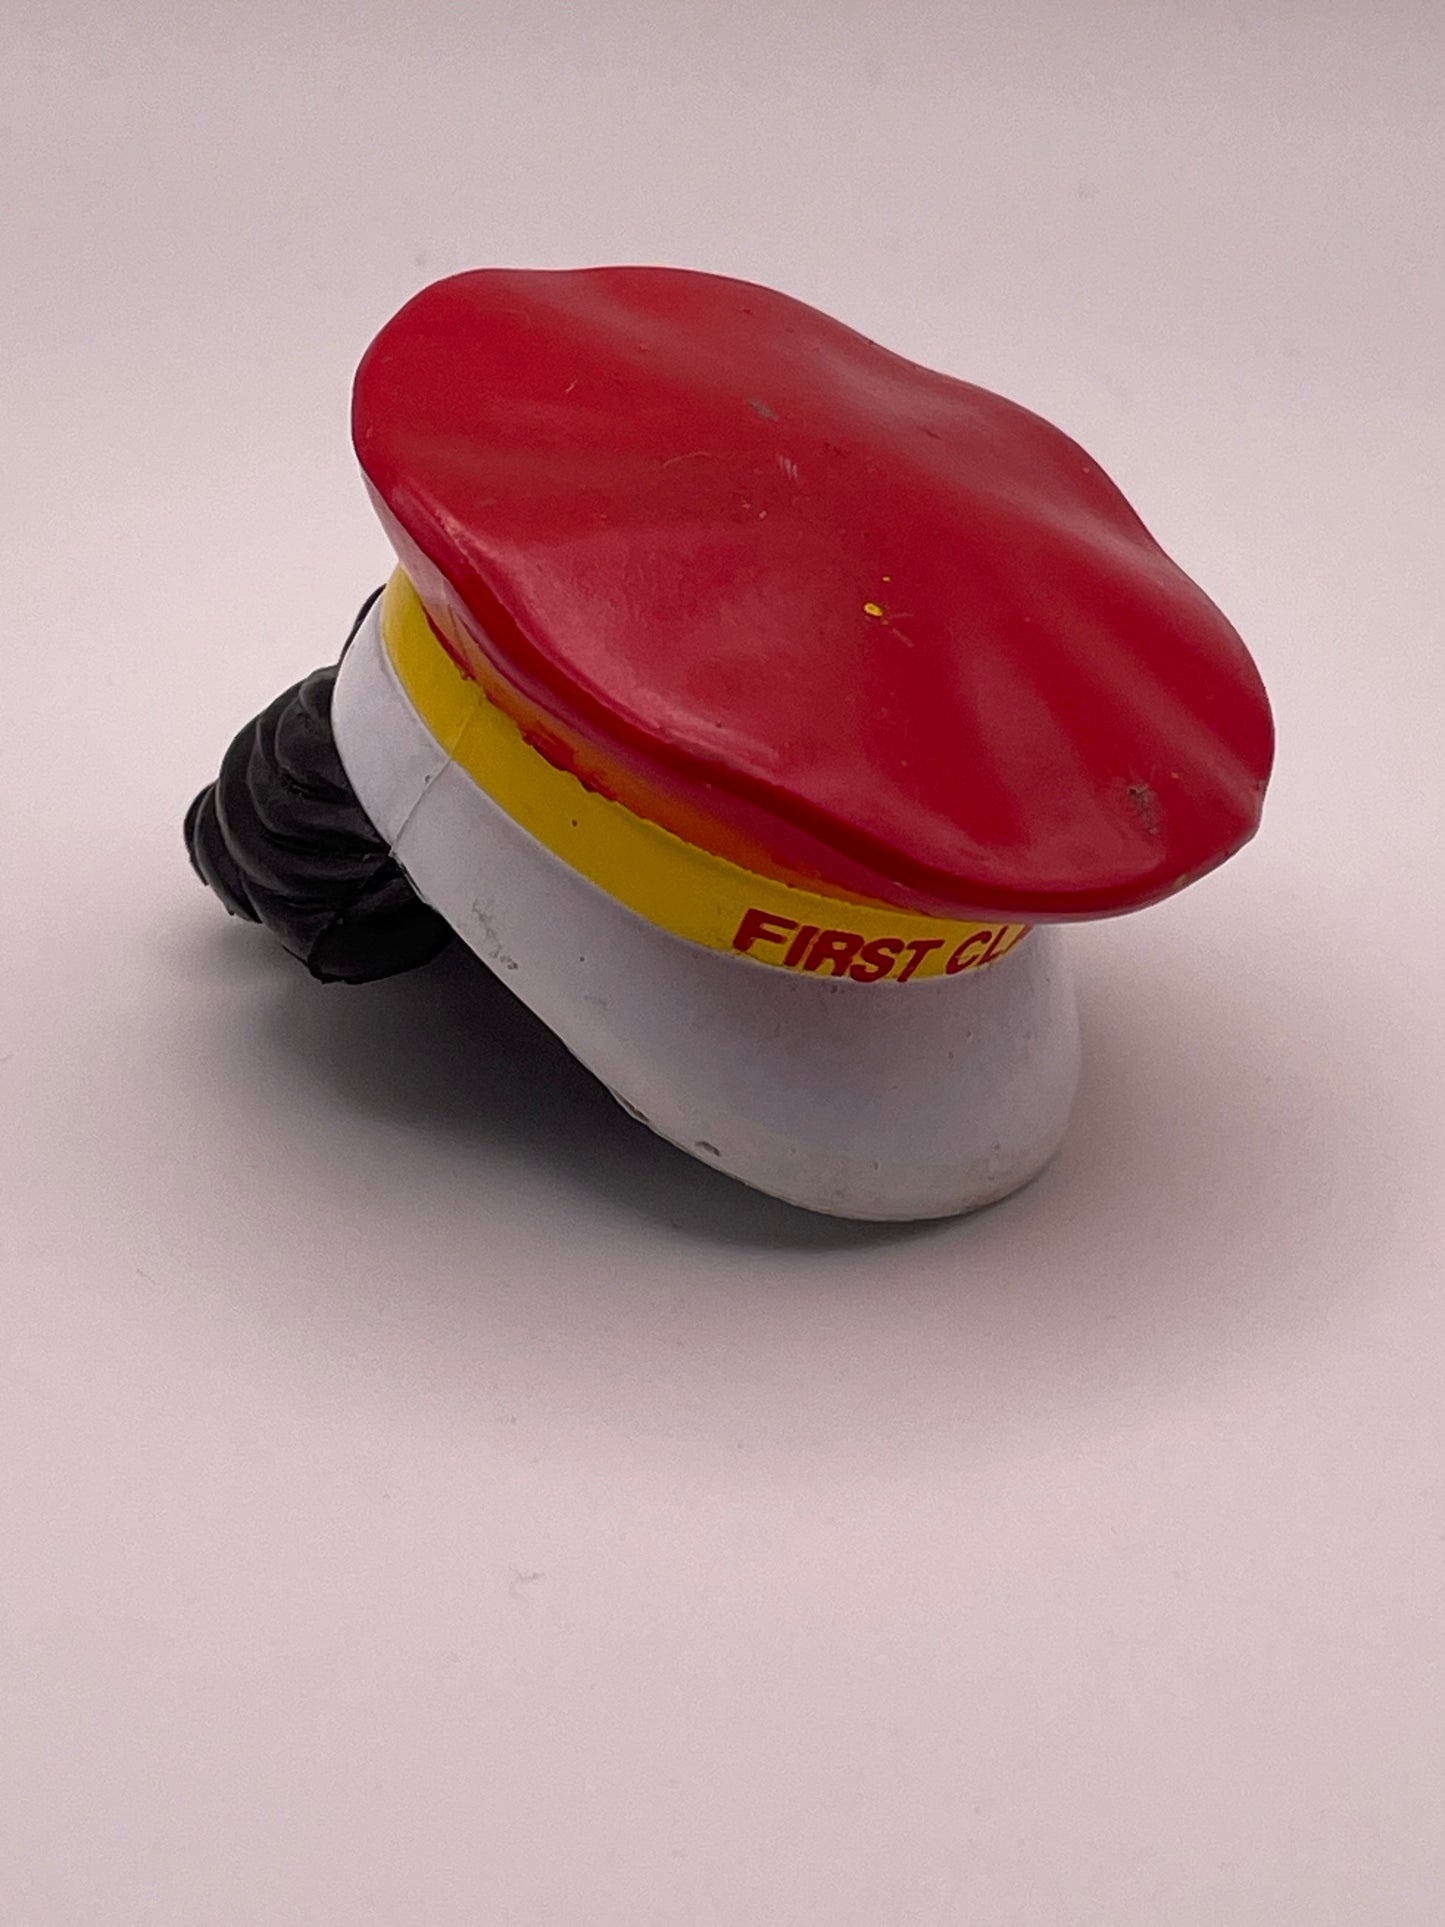 McDonald’s Happy Meal Toy - First Class Hat #100808